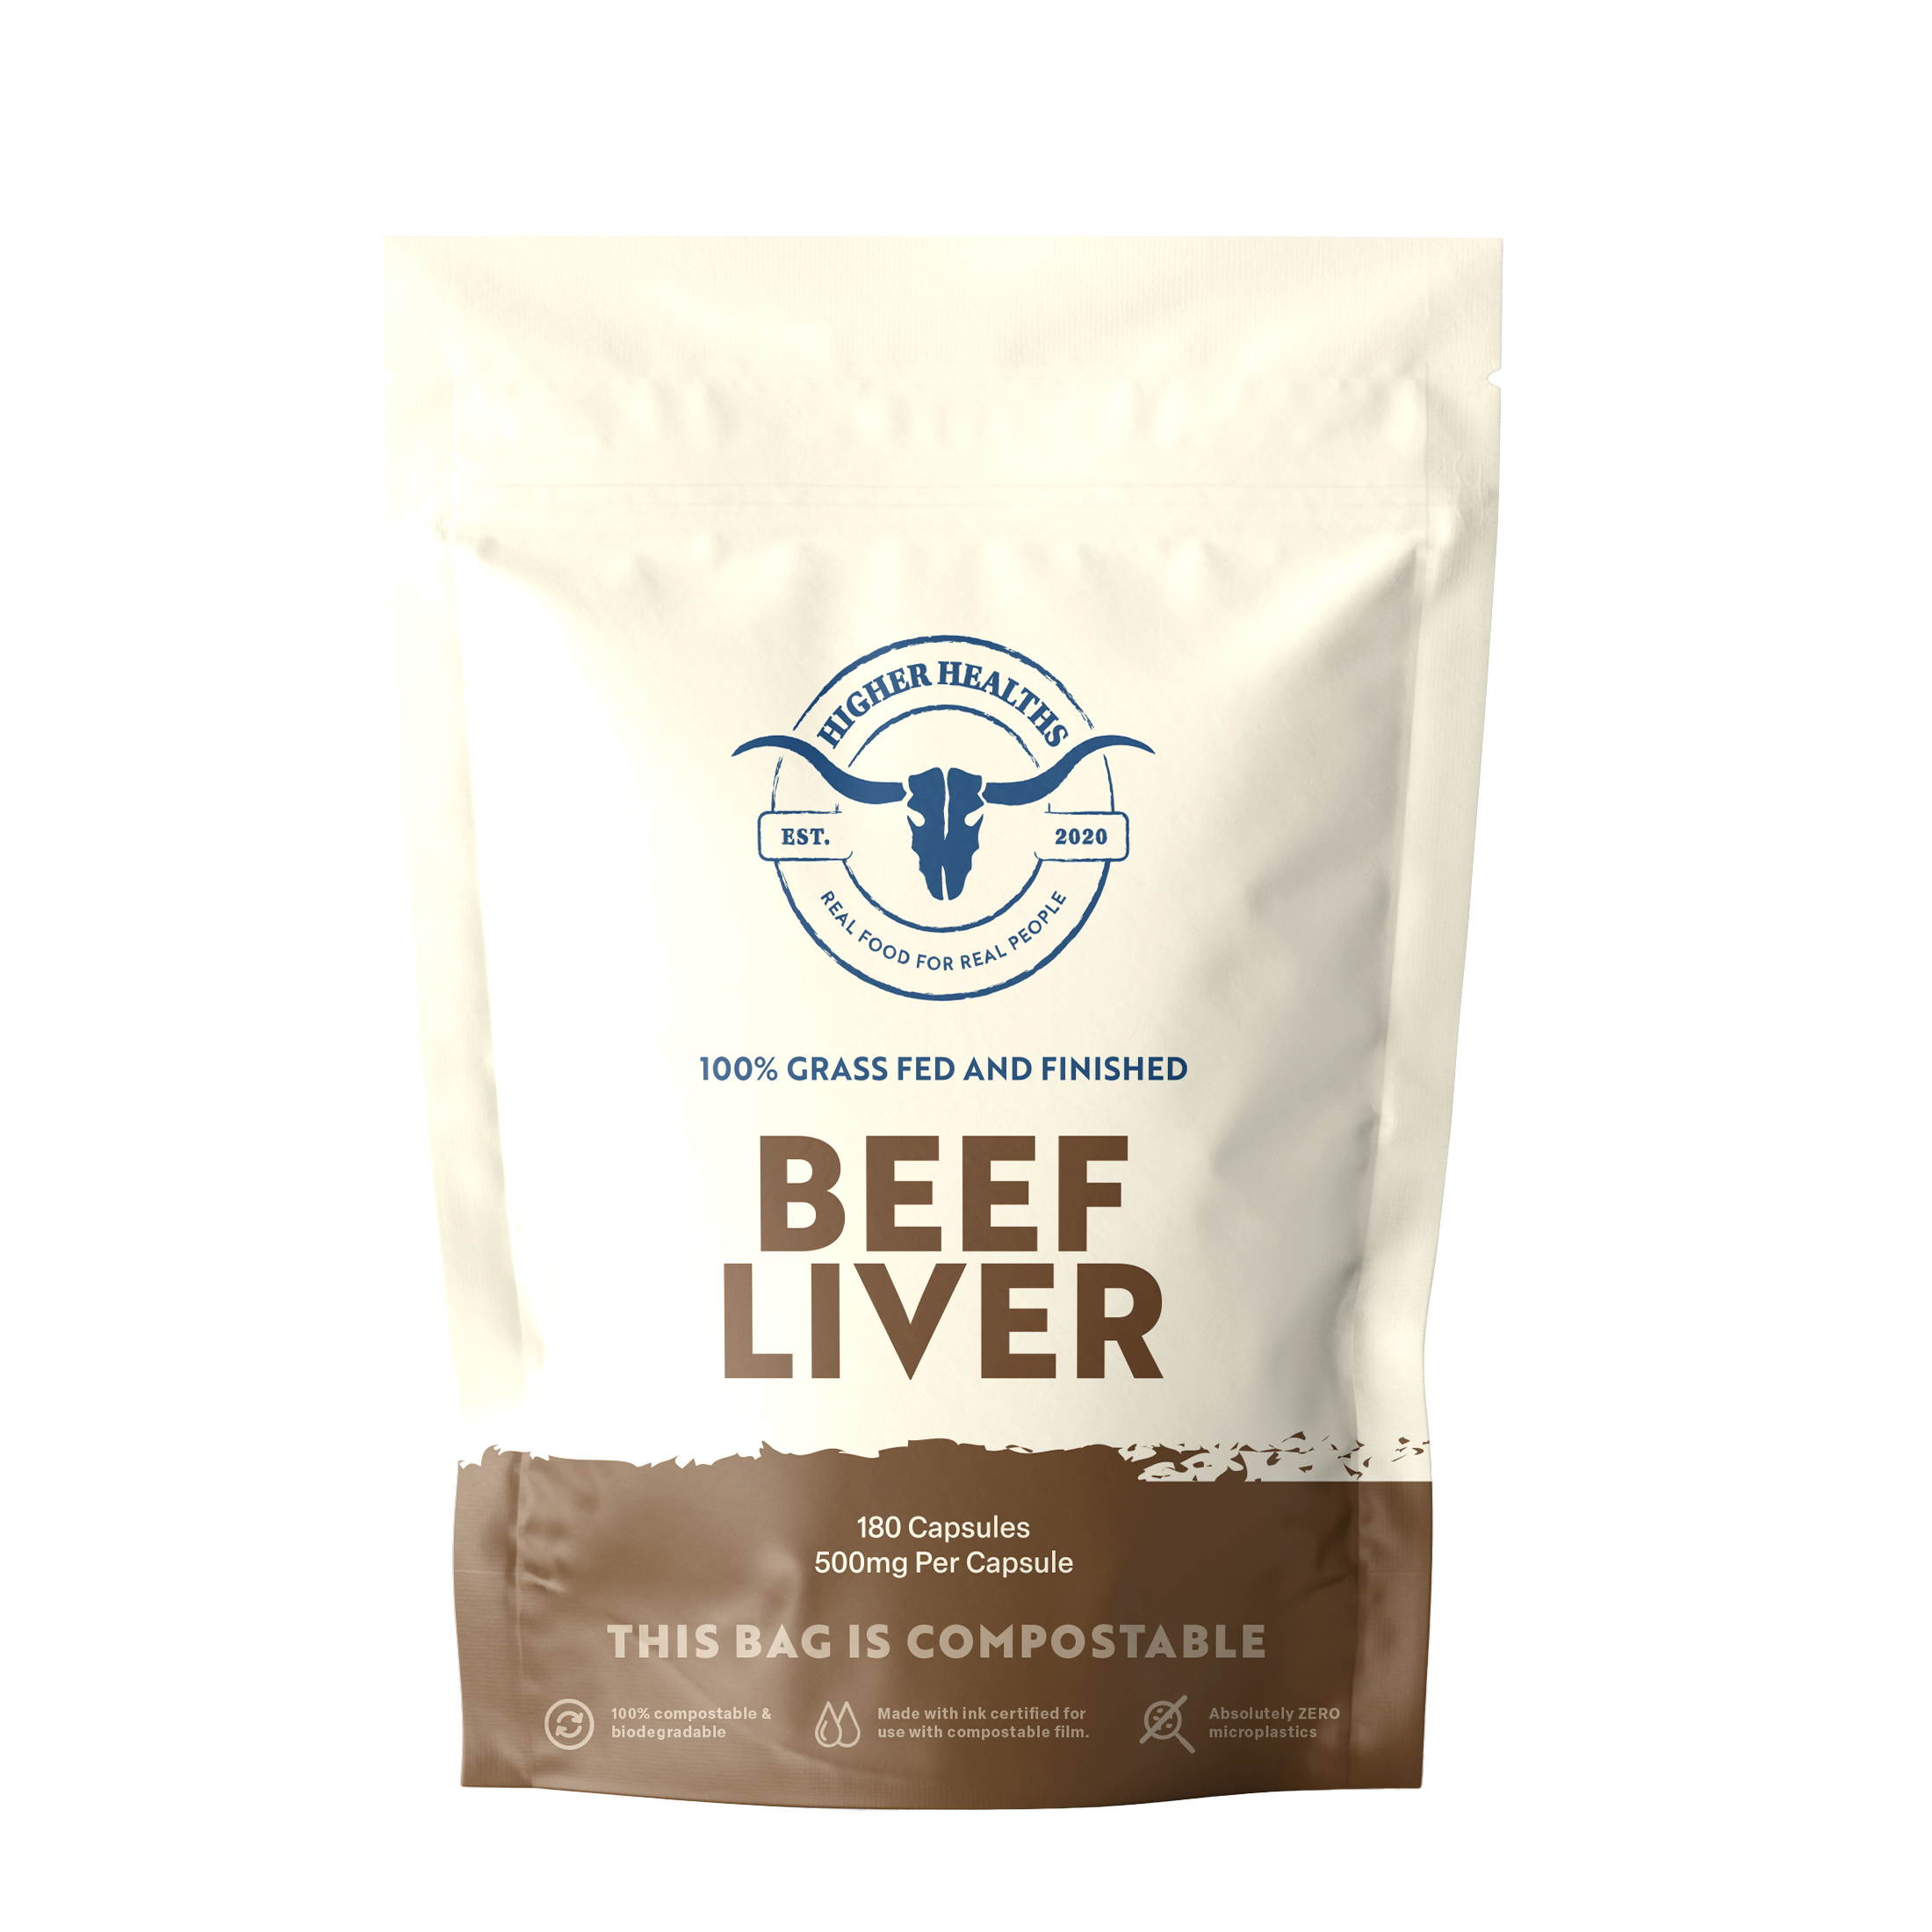 SUBSCRIBE & SAVE! Beef Liver - Nature’s Multivitamin